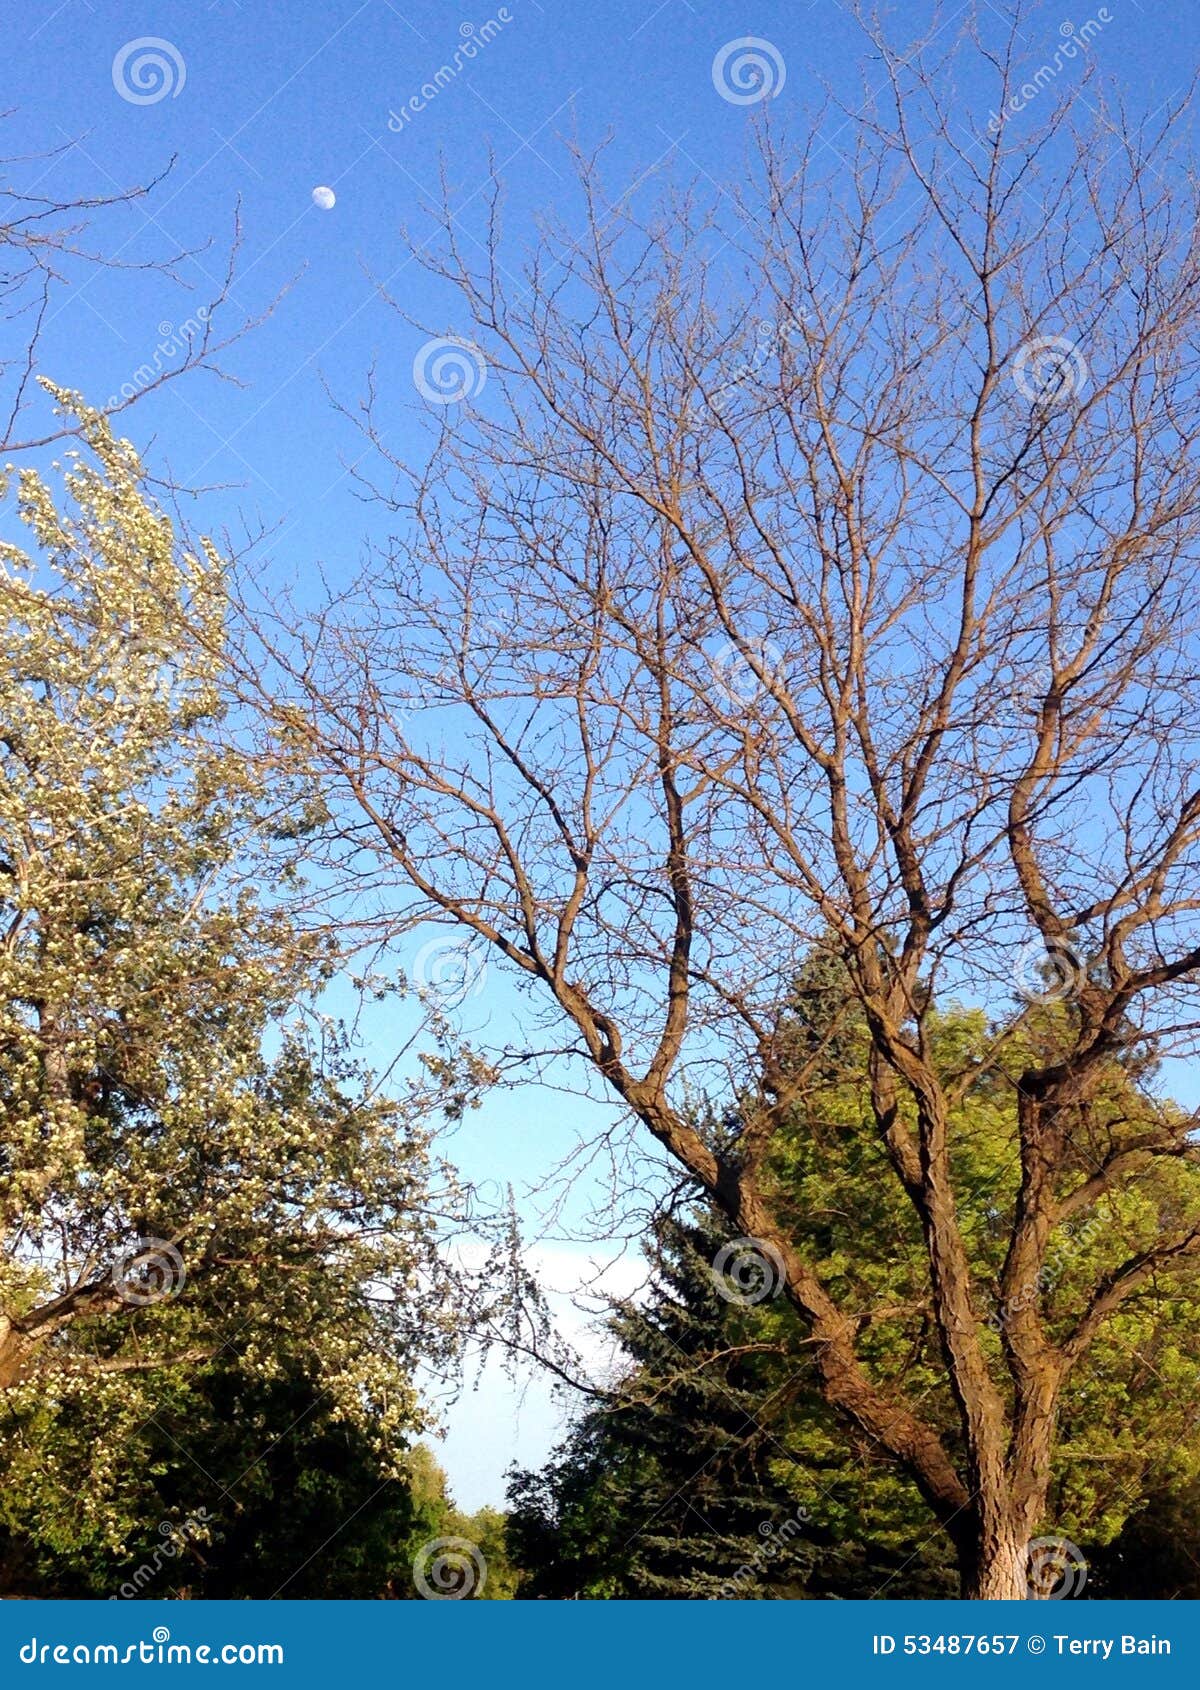 Park Trees and Sky with Moon Stock Image - Image of trees, spring: 53487657